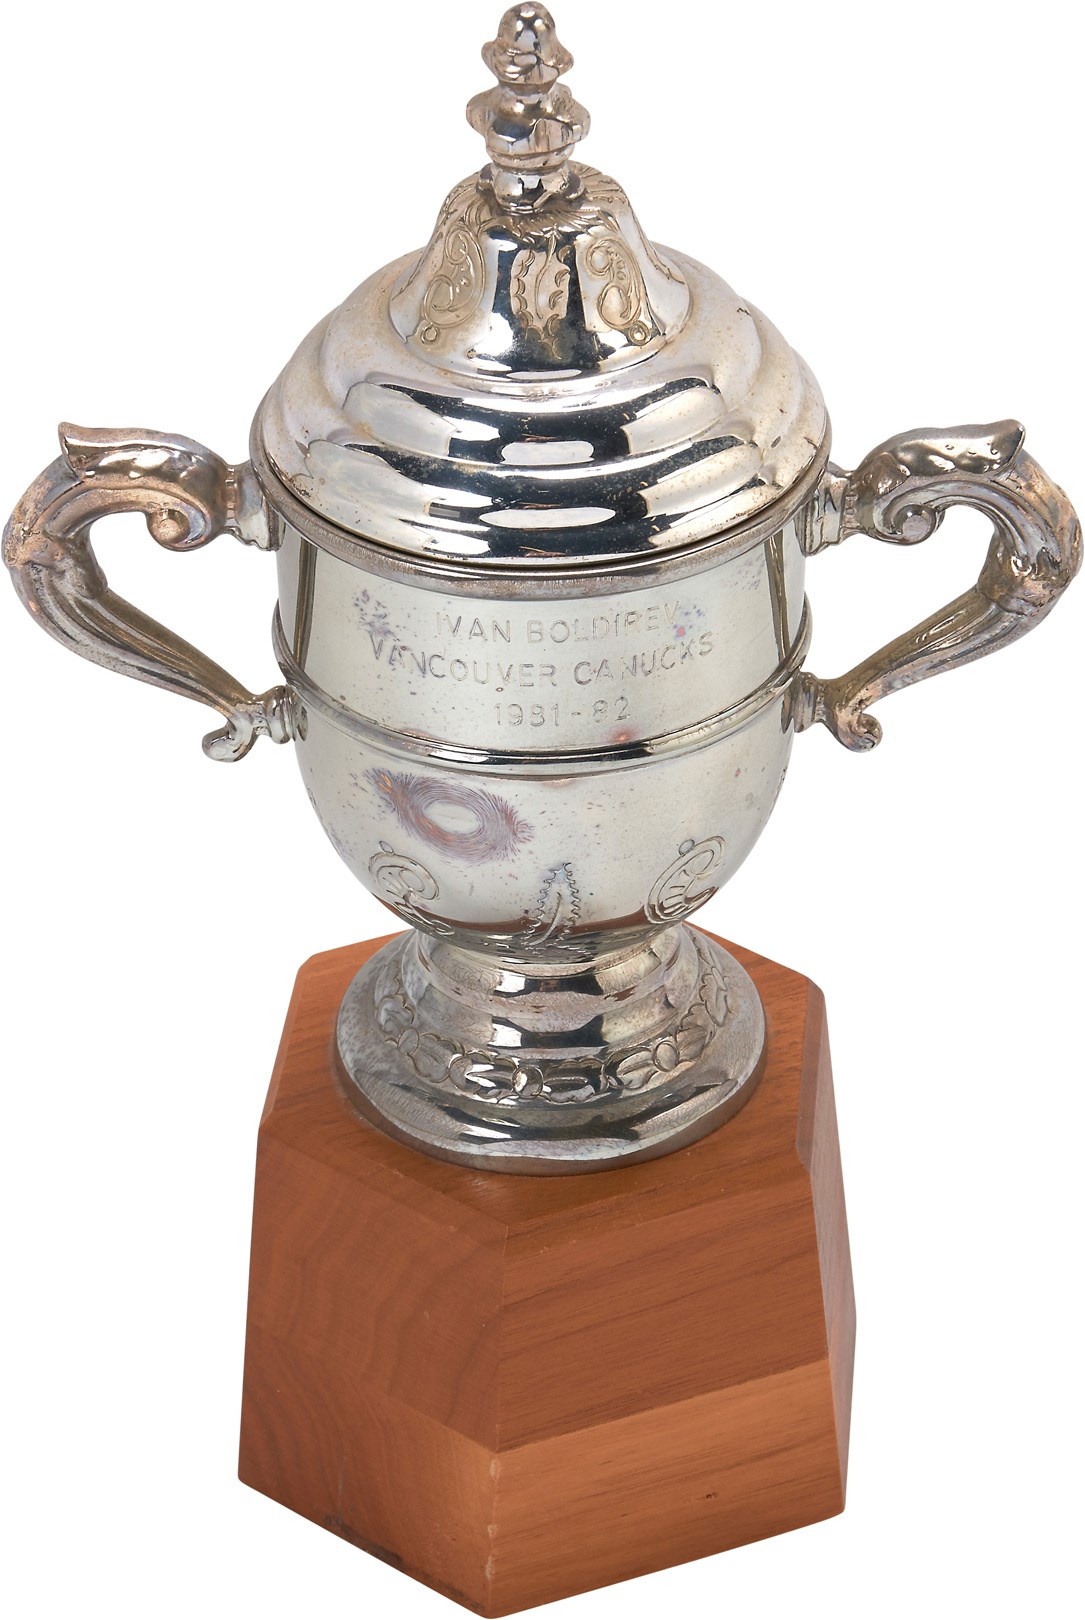 1981 Clarence S, Campbell Bowl Presented to Ivan Boldierev with LOA (PSA)